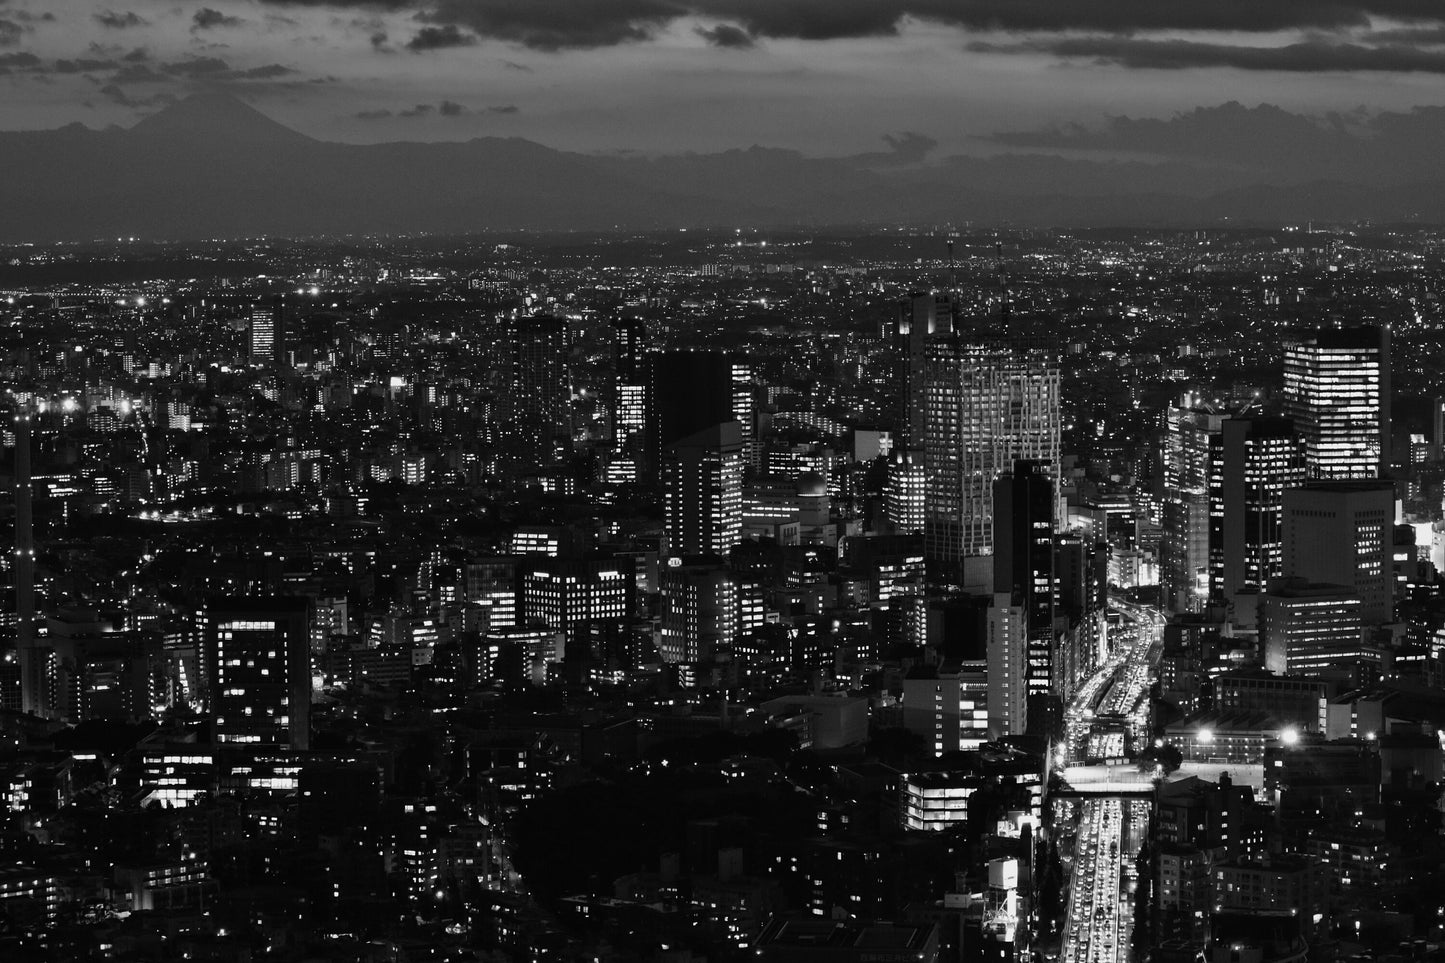 Tokyo Skyline At Night Black and White Photography Print